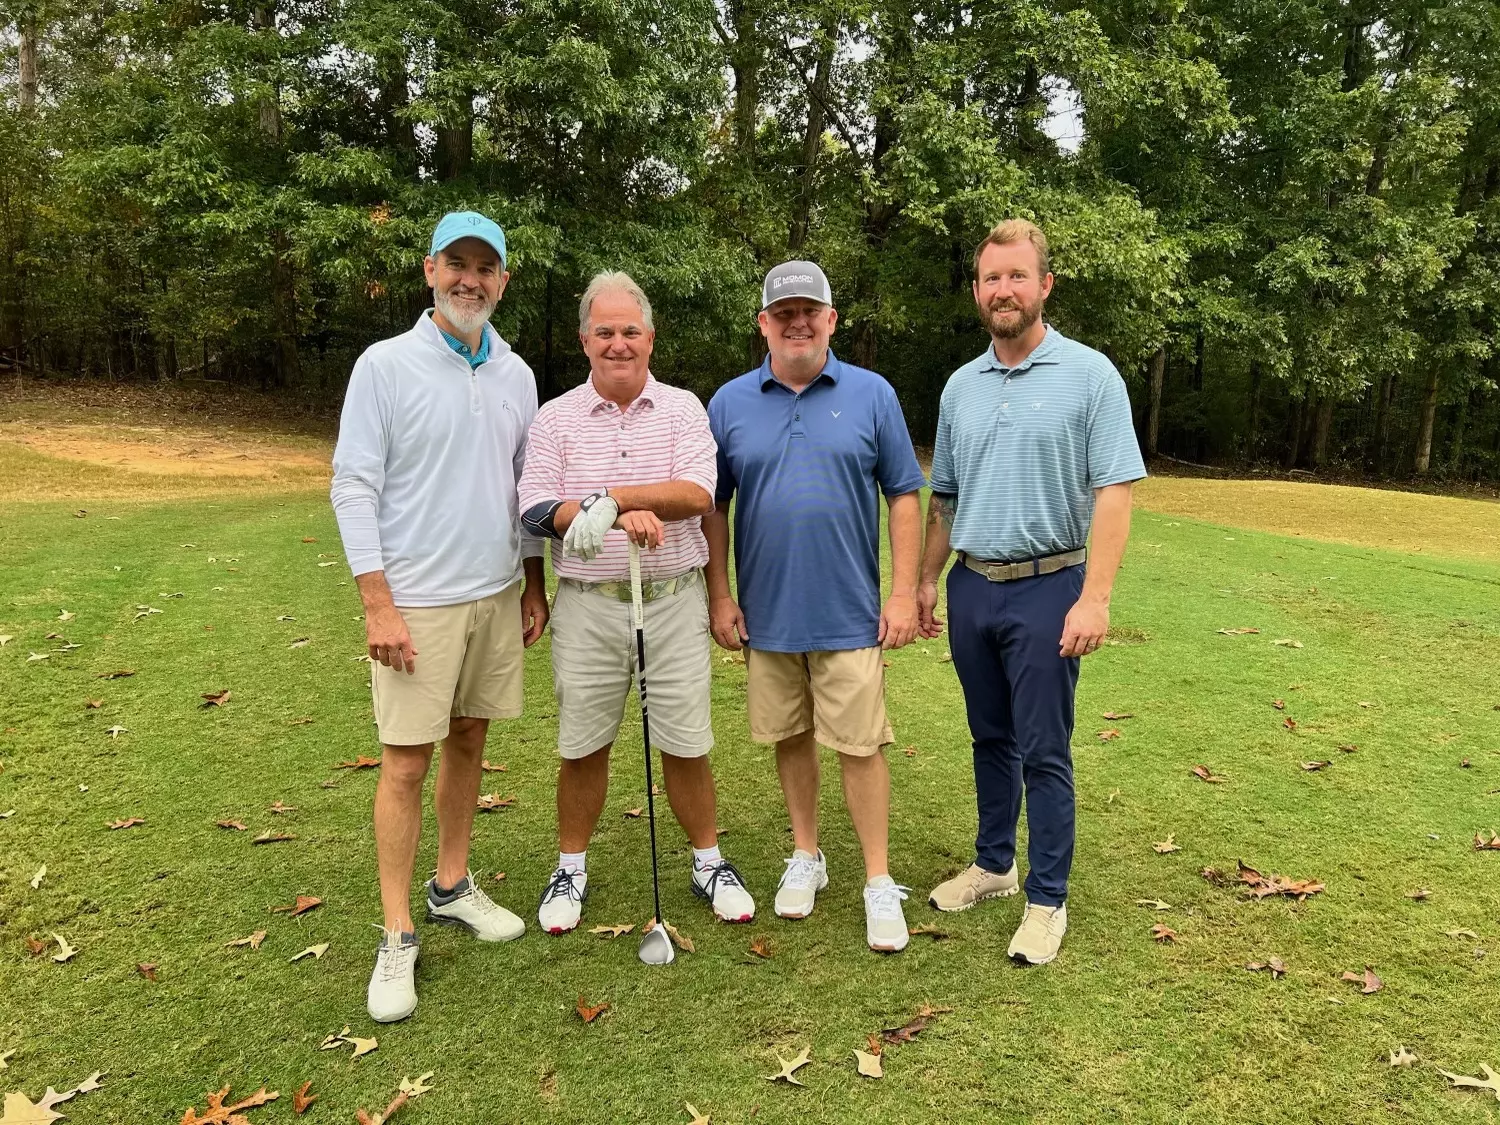 Momon Construction was one of two title sponsors for the Foundation Golf Tournament. Matt Hibberts, Clint Woodall, Mason Mashburn and Russ Edwards played for the Momon team.